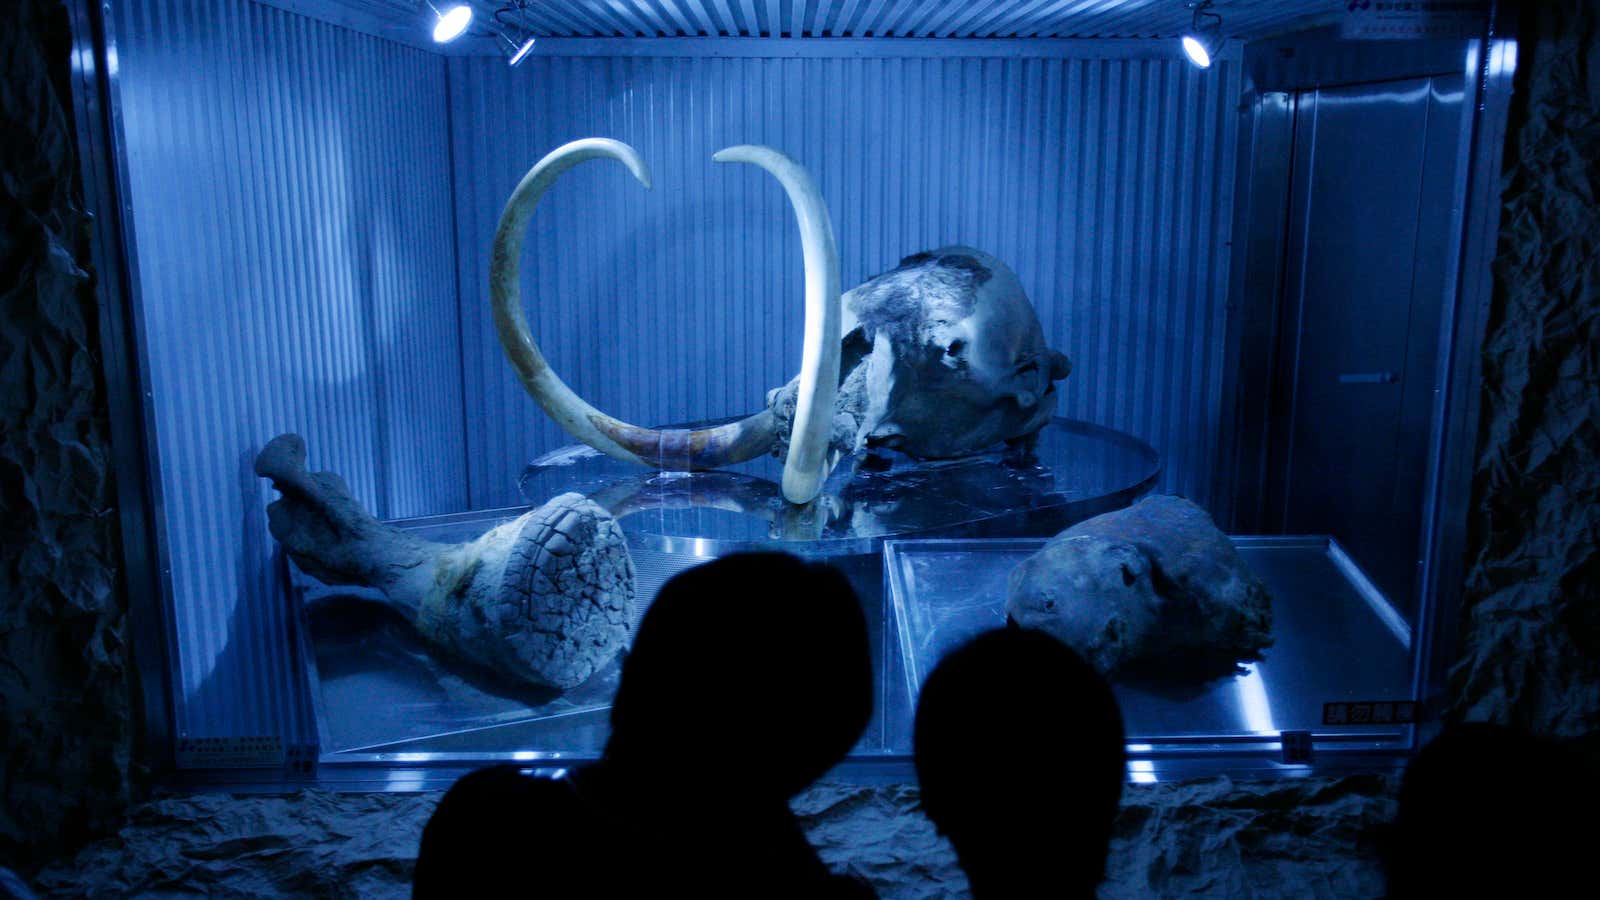 We’re getting close to resurrecting animals like the woolly mammoth—but should we?